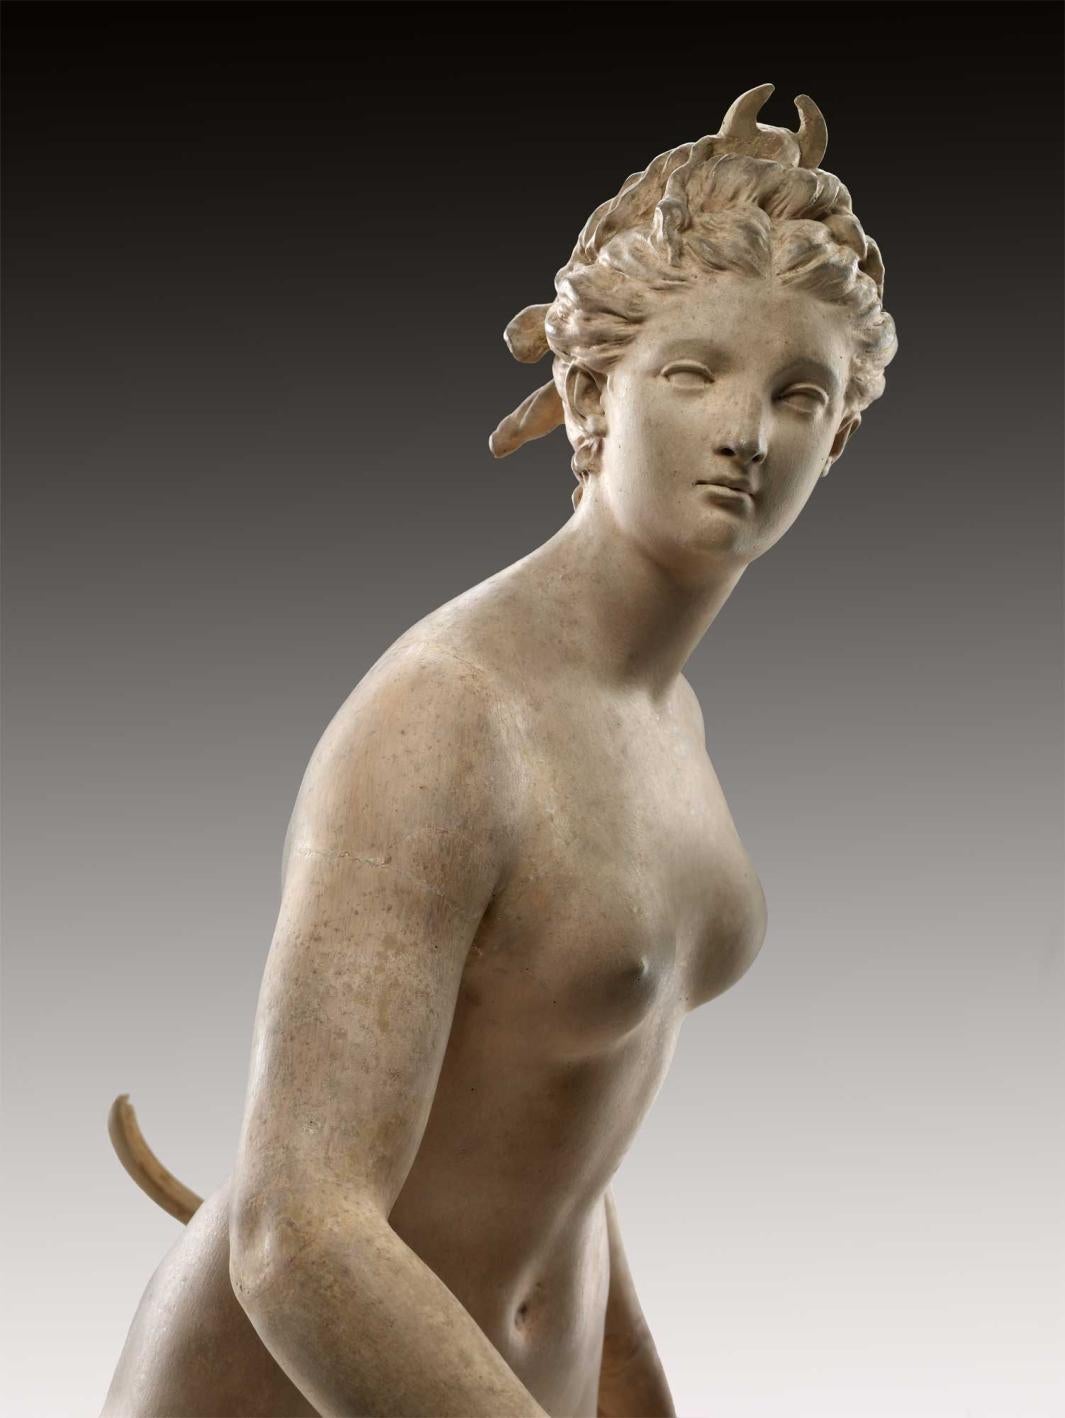 Close-up view of a terracotta sculpture of the nude goddess Diana holding a bow and on one foot